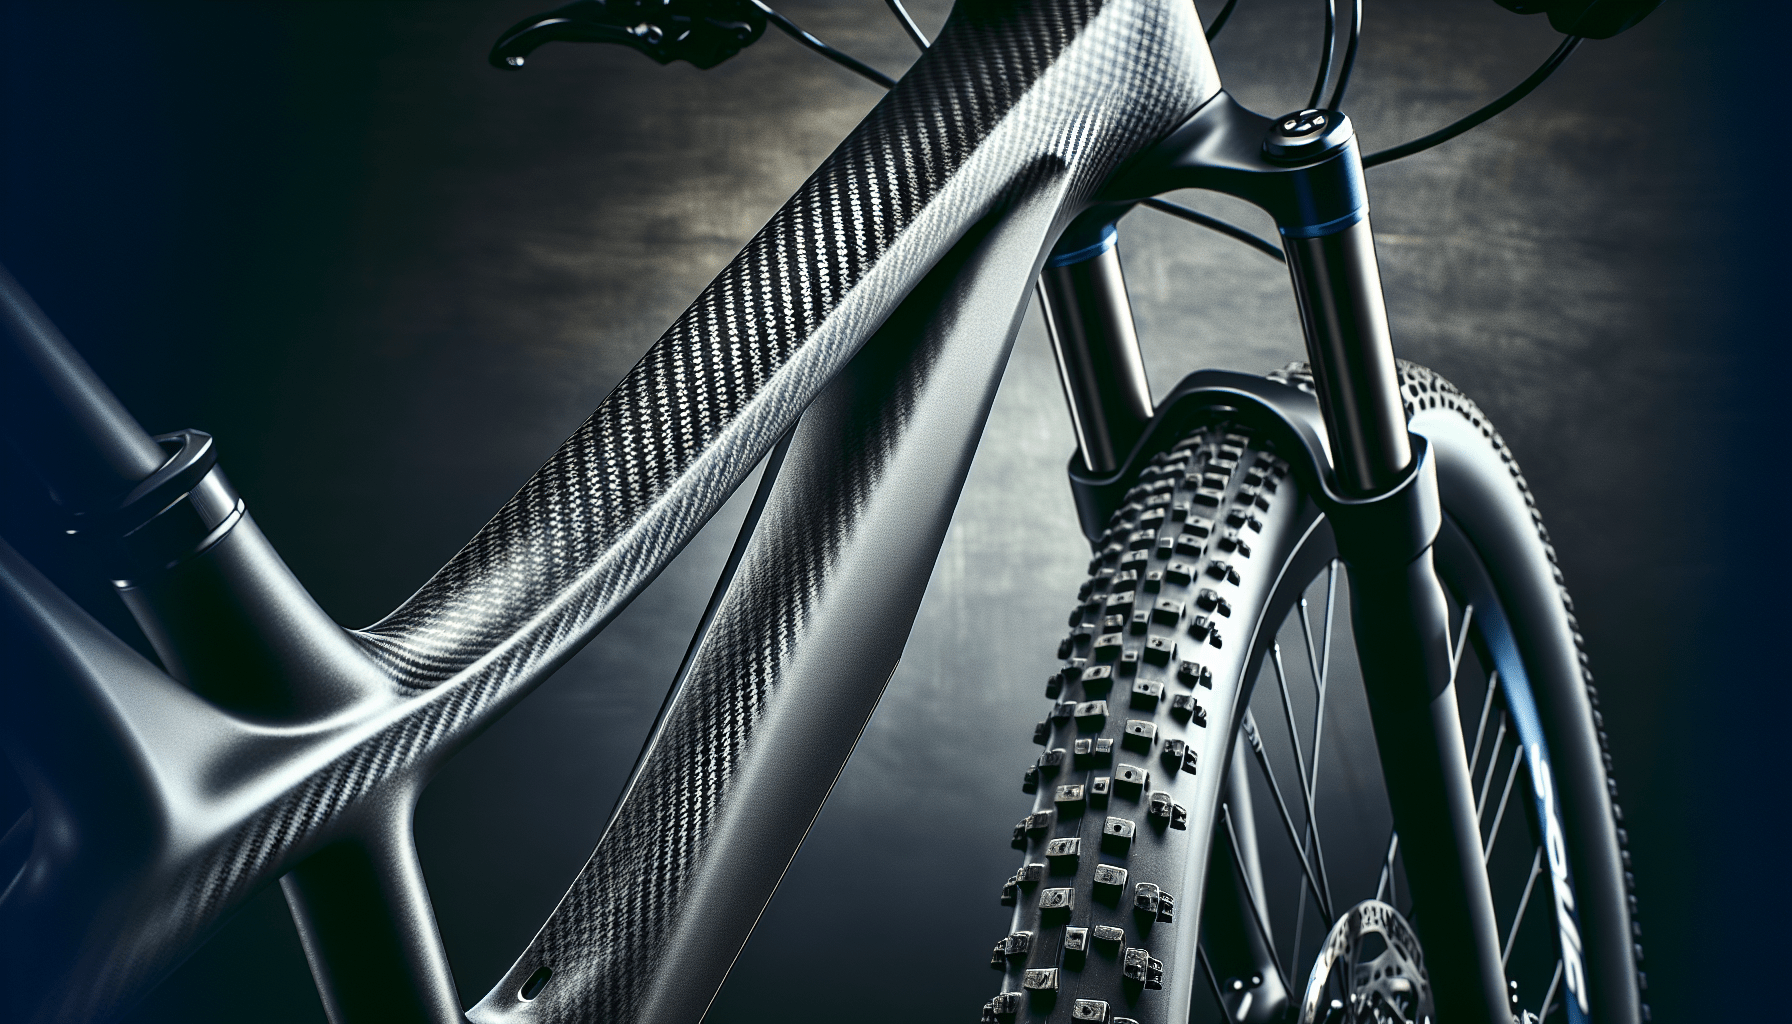 Elevate Your Ride With The Top 3 Carbon Off-Road Bikes – Get Yours Today!